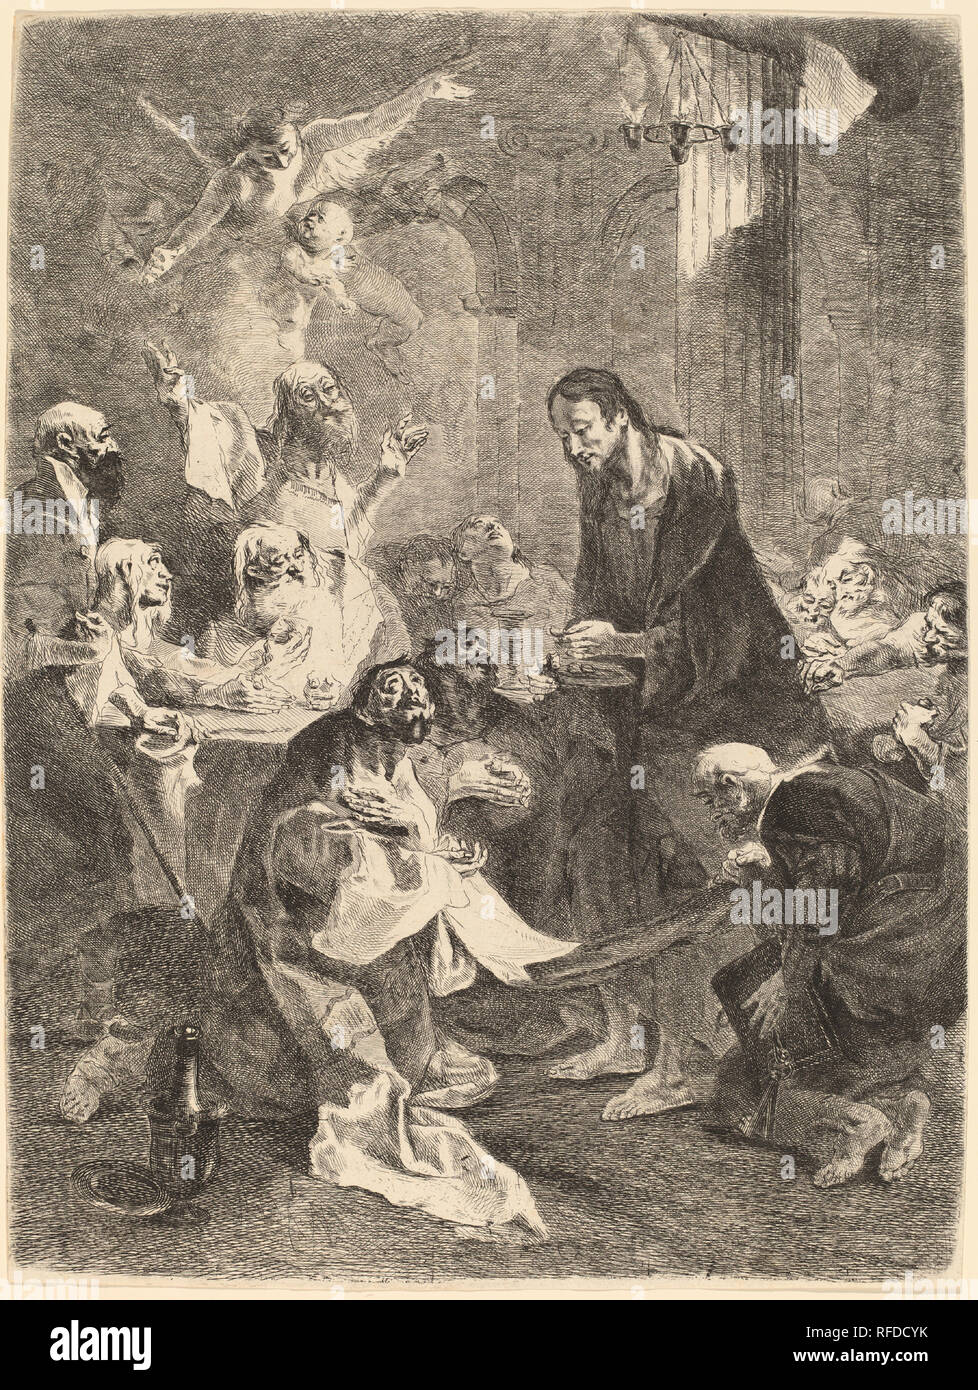 The Institution of the Eucharist. Dated: c. 1765. Dimensions: plate: 41.6 x 31 cm (16 3/8 x 12 3/16 in.)  sheet: 42.1 x 31.2 cm (16 9/16 x 12 5/16 in.). Medium: etching and engraving on laid paper. Museum: National Gallery of Art, Washington DC. Author: Franz Anton Maulbertsch. Stock Photo